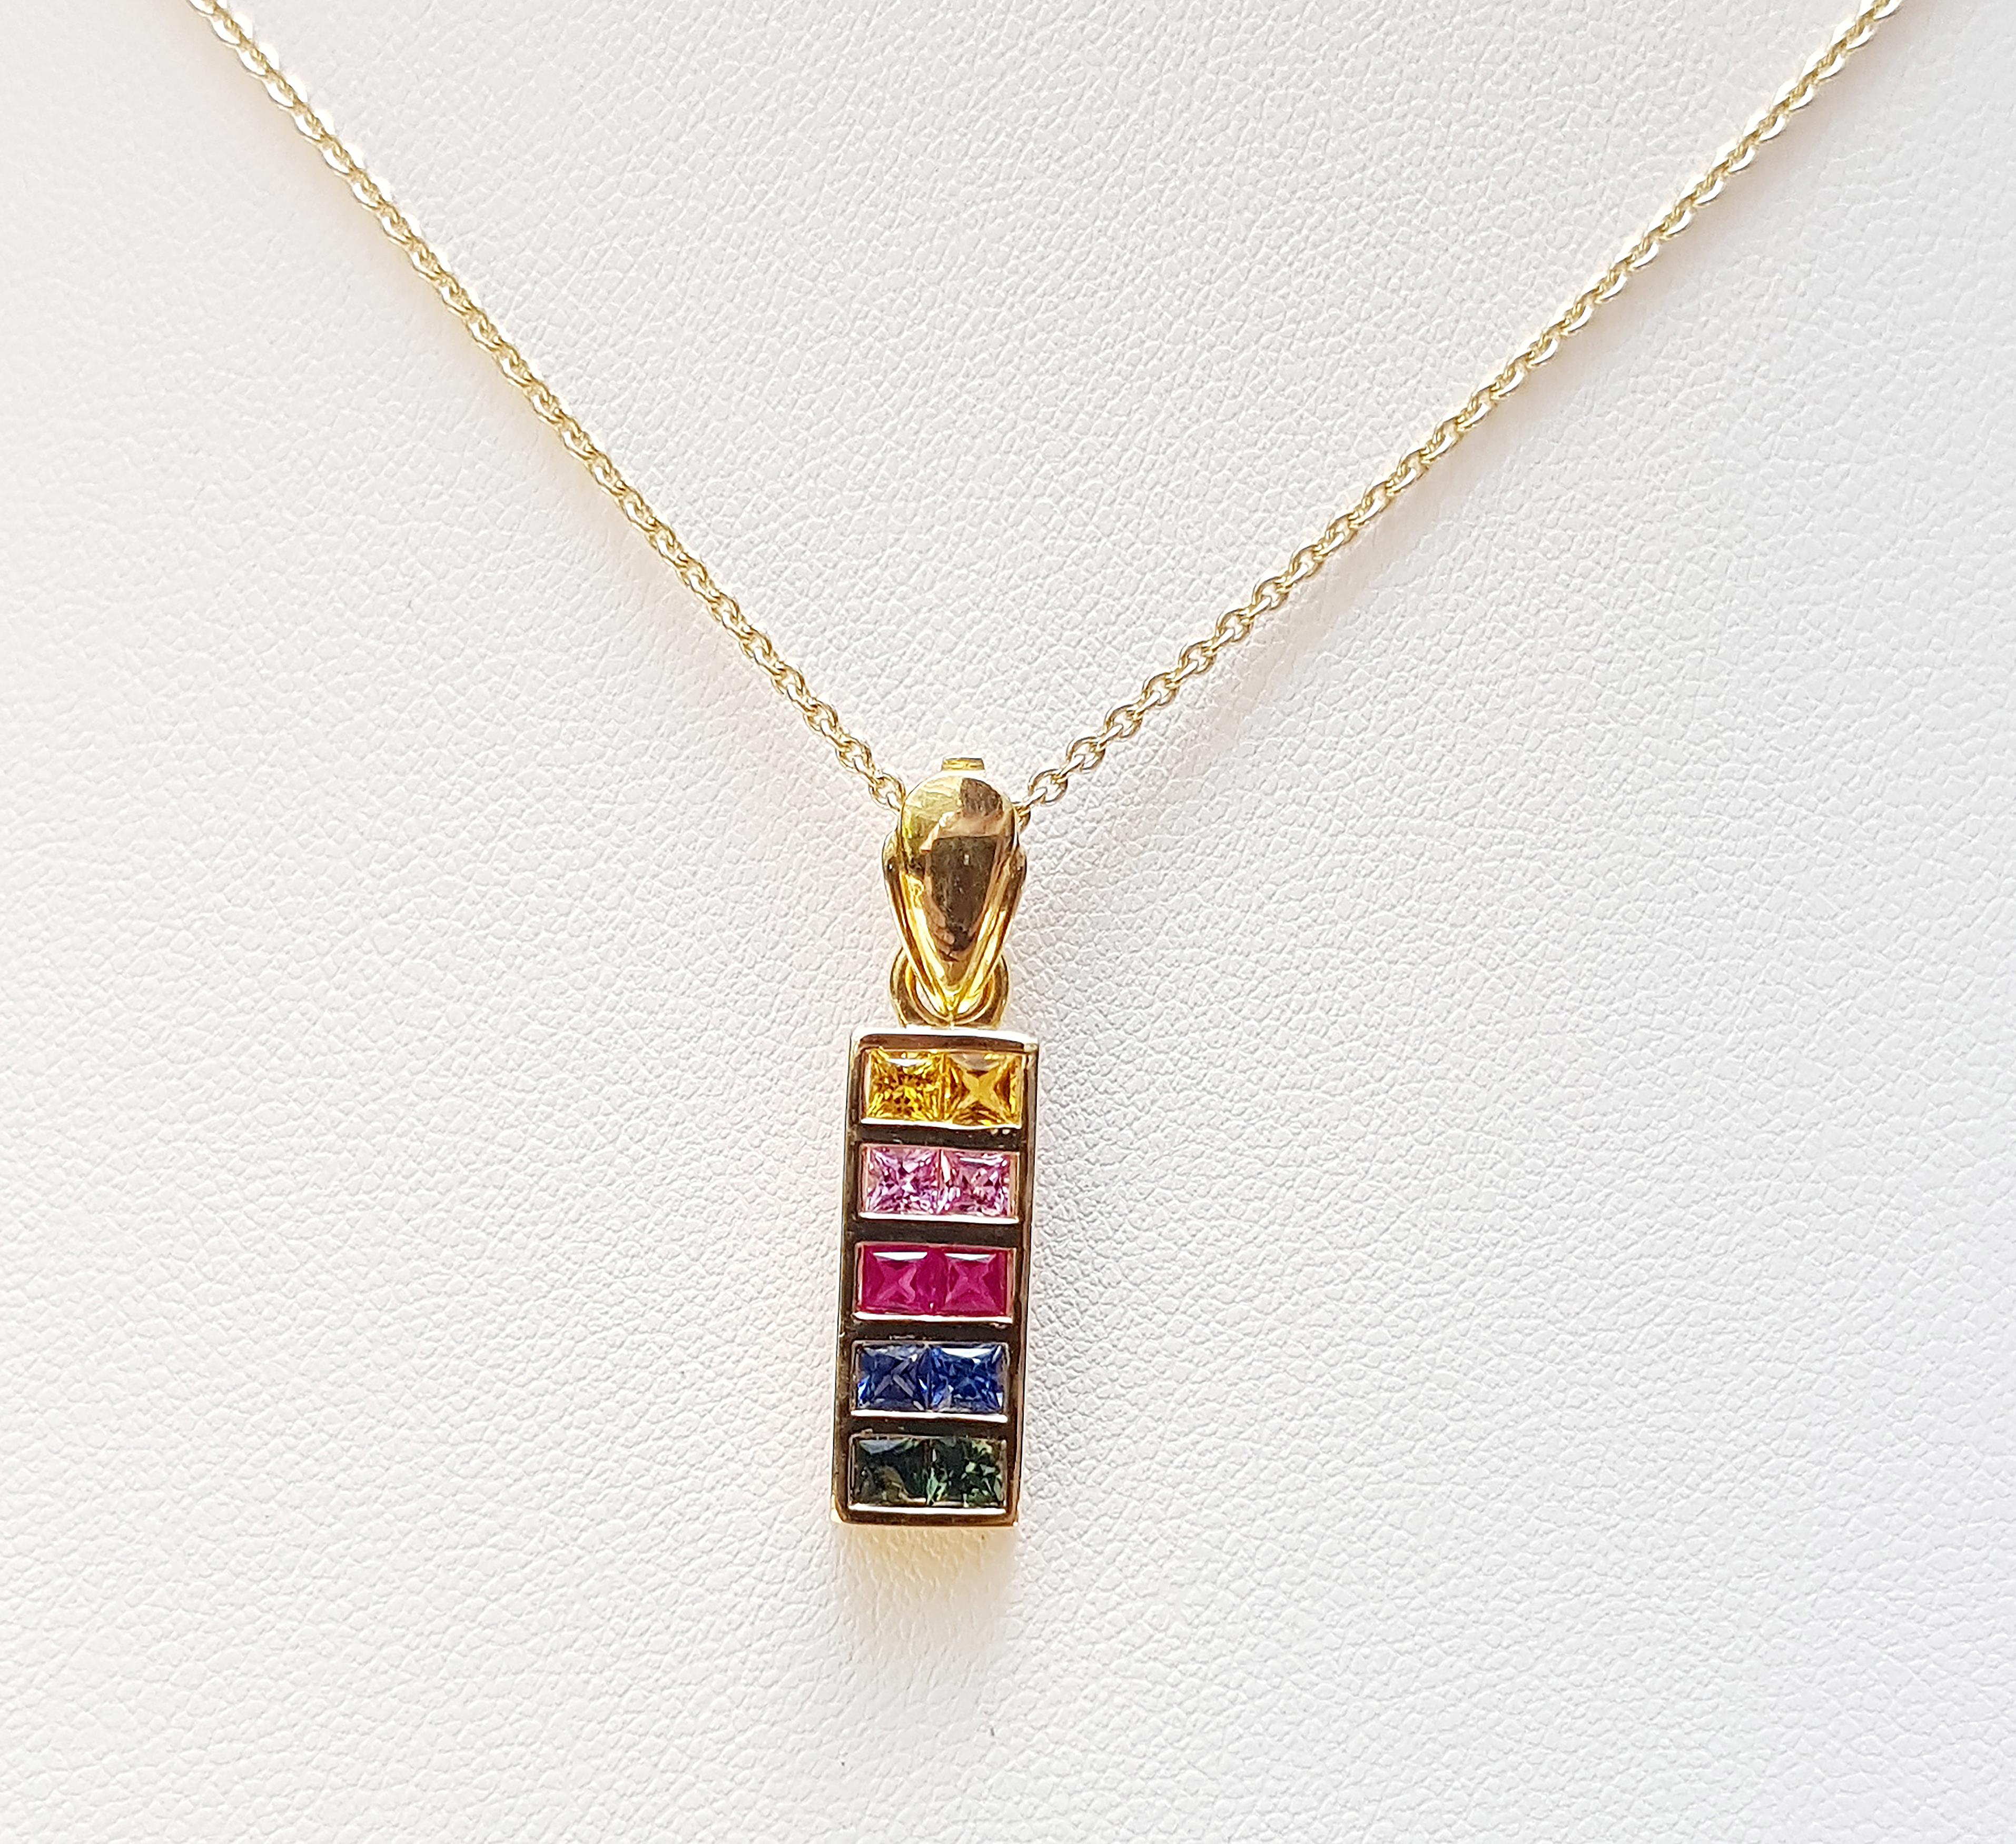 Rainbow Colour Sapphire 1.39 carats Pendant set in 18 Karat Gold Settings
(chain not included)

Width:  0.7 cm 
Length: 2.7 cm
Total Weight: 4.18 grams

